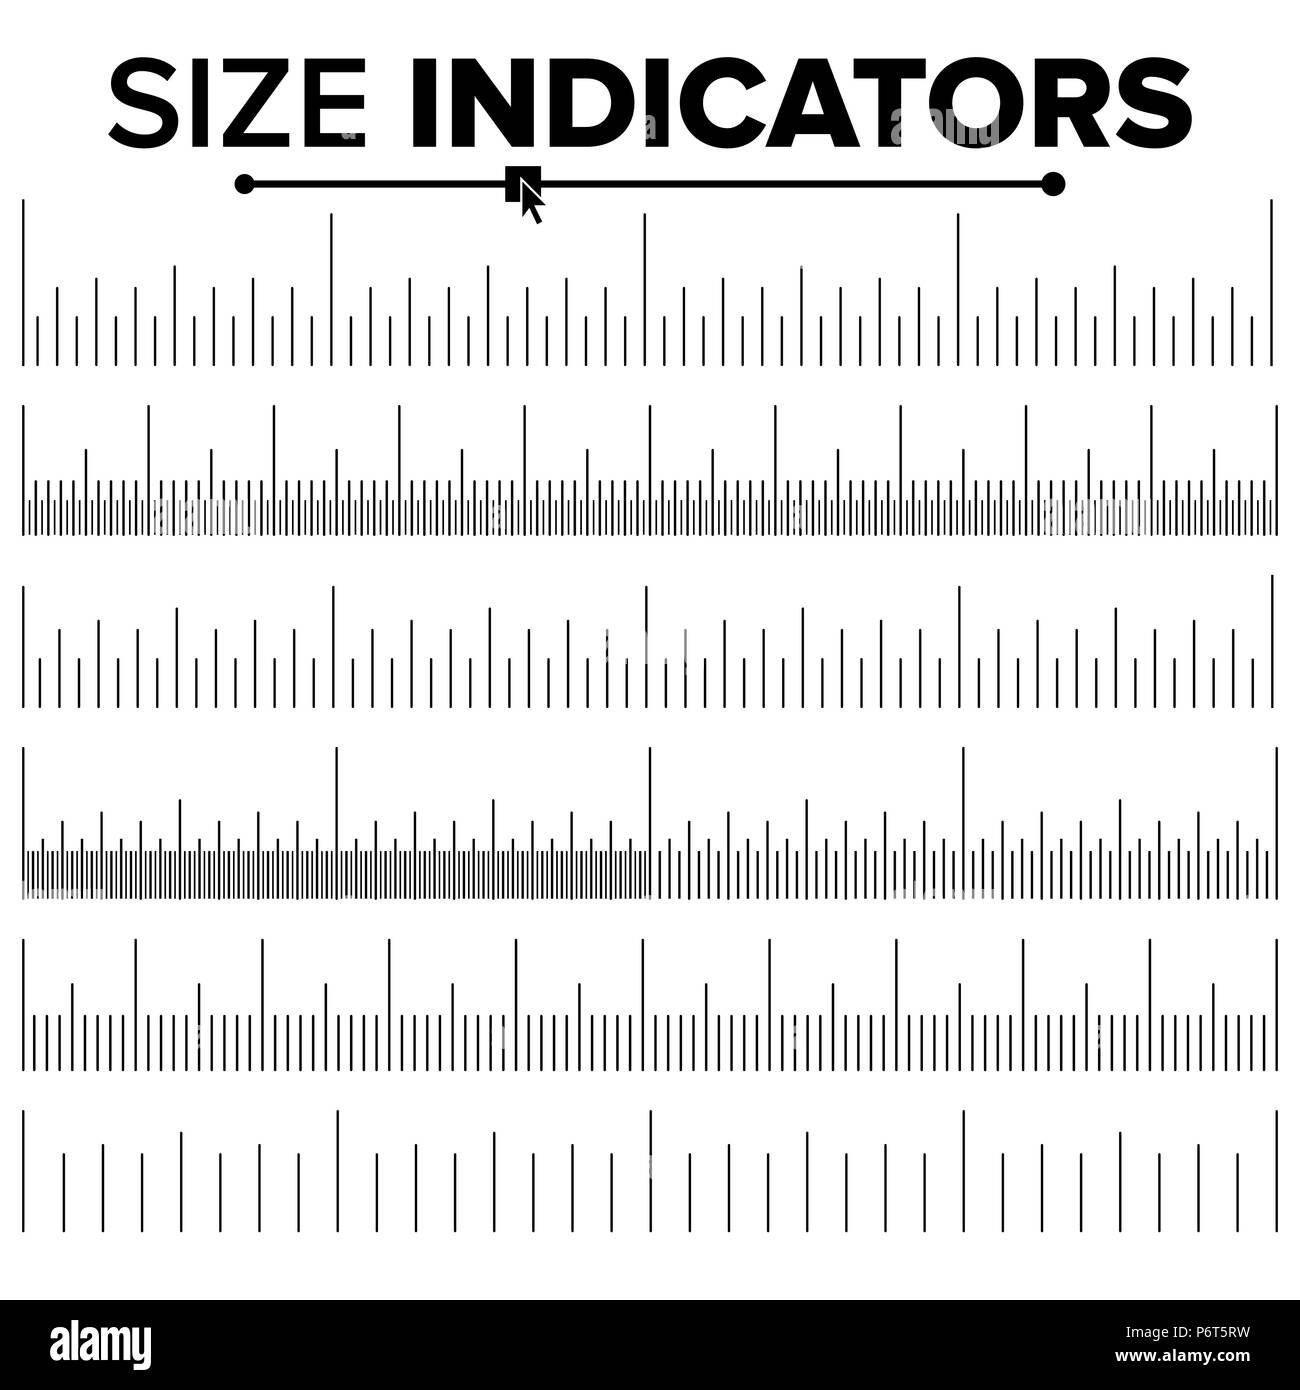 https://c8.alamy.com/comp/P6T5RW/size-indicator-set-vector-ruler-scale-distances-graduation-size-indicator-units-centimeter-and-inches-isolated-illustration-P6T5RW.jpg